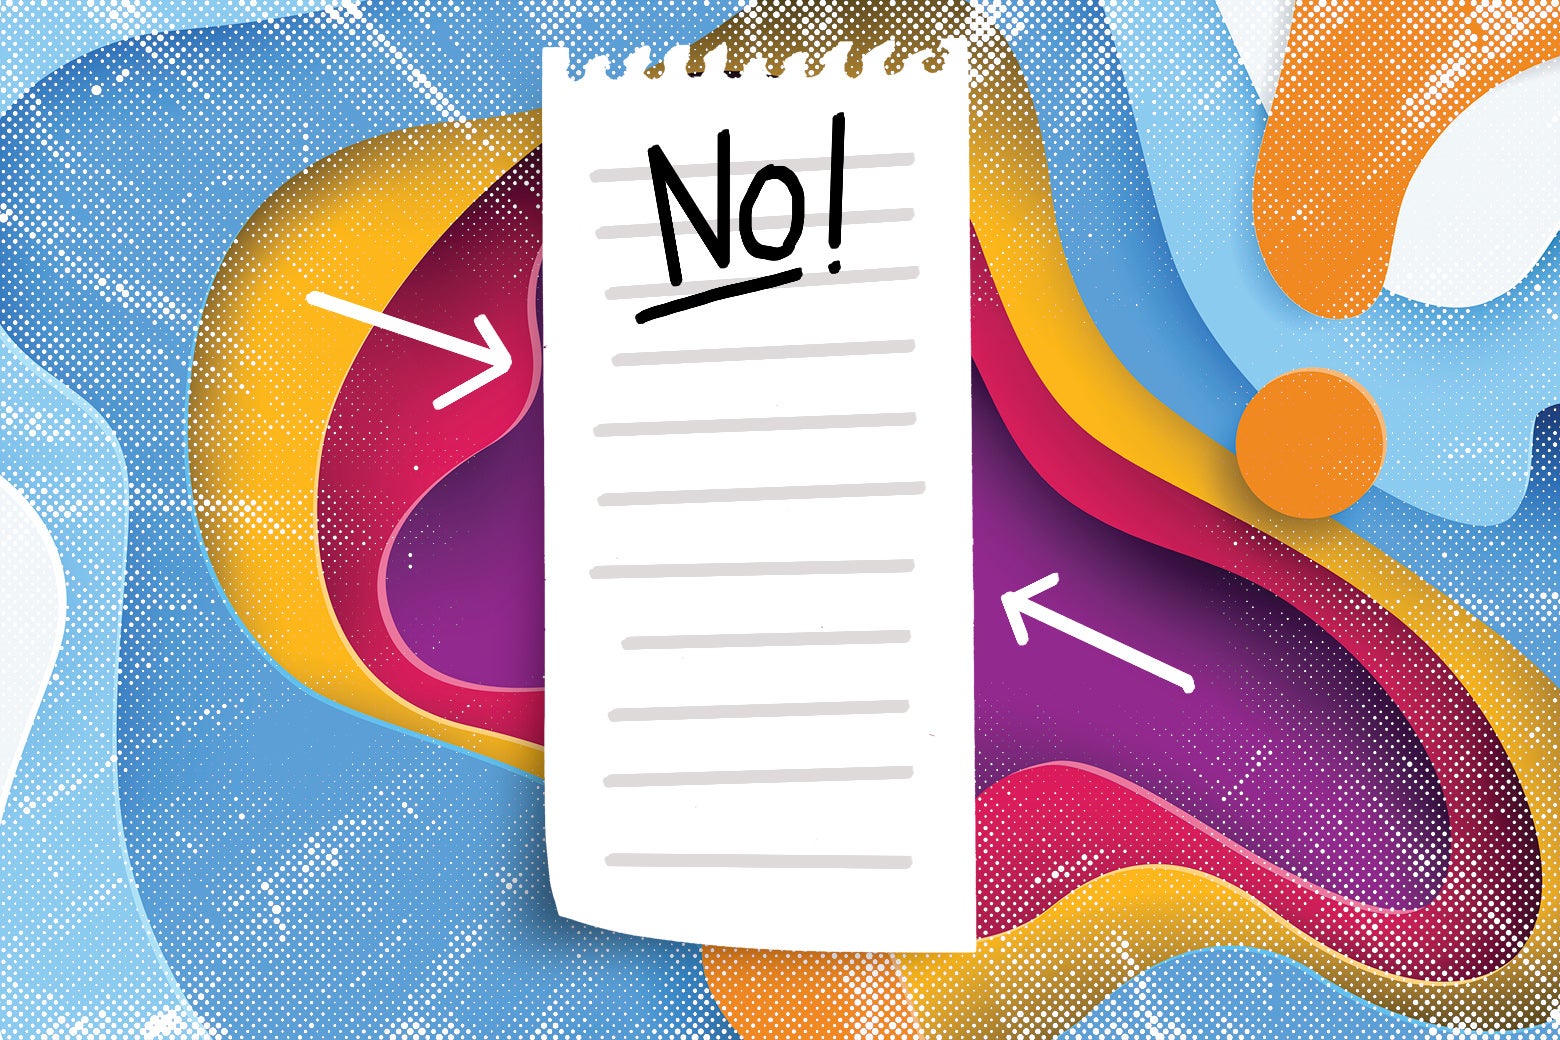 A scrap of notebook paper that says, "NO!" on it.